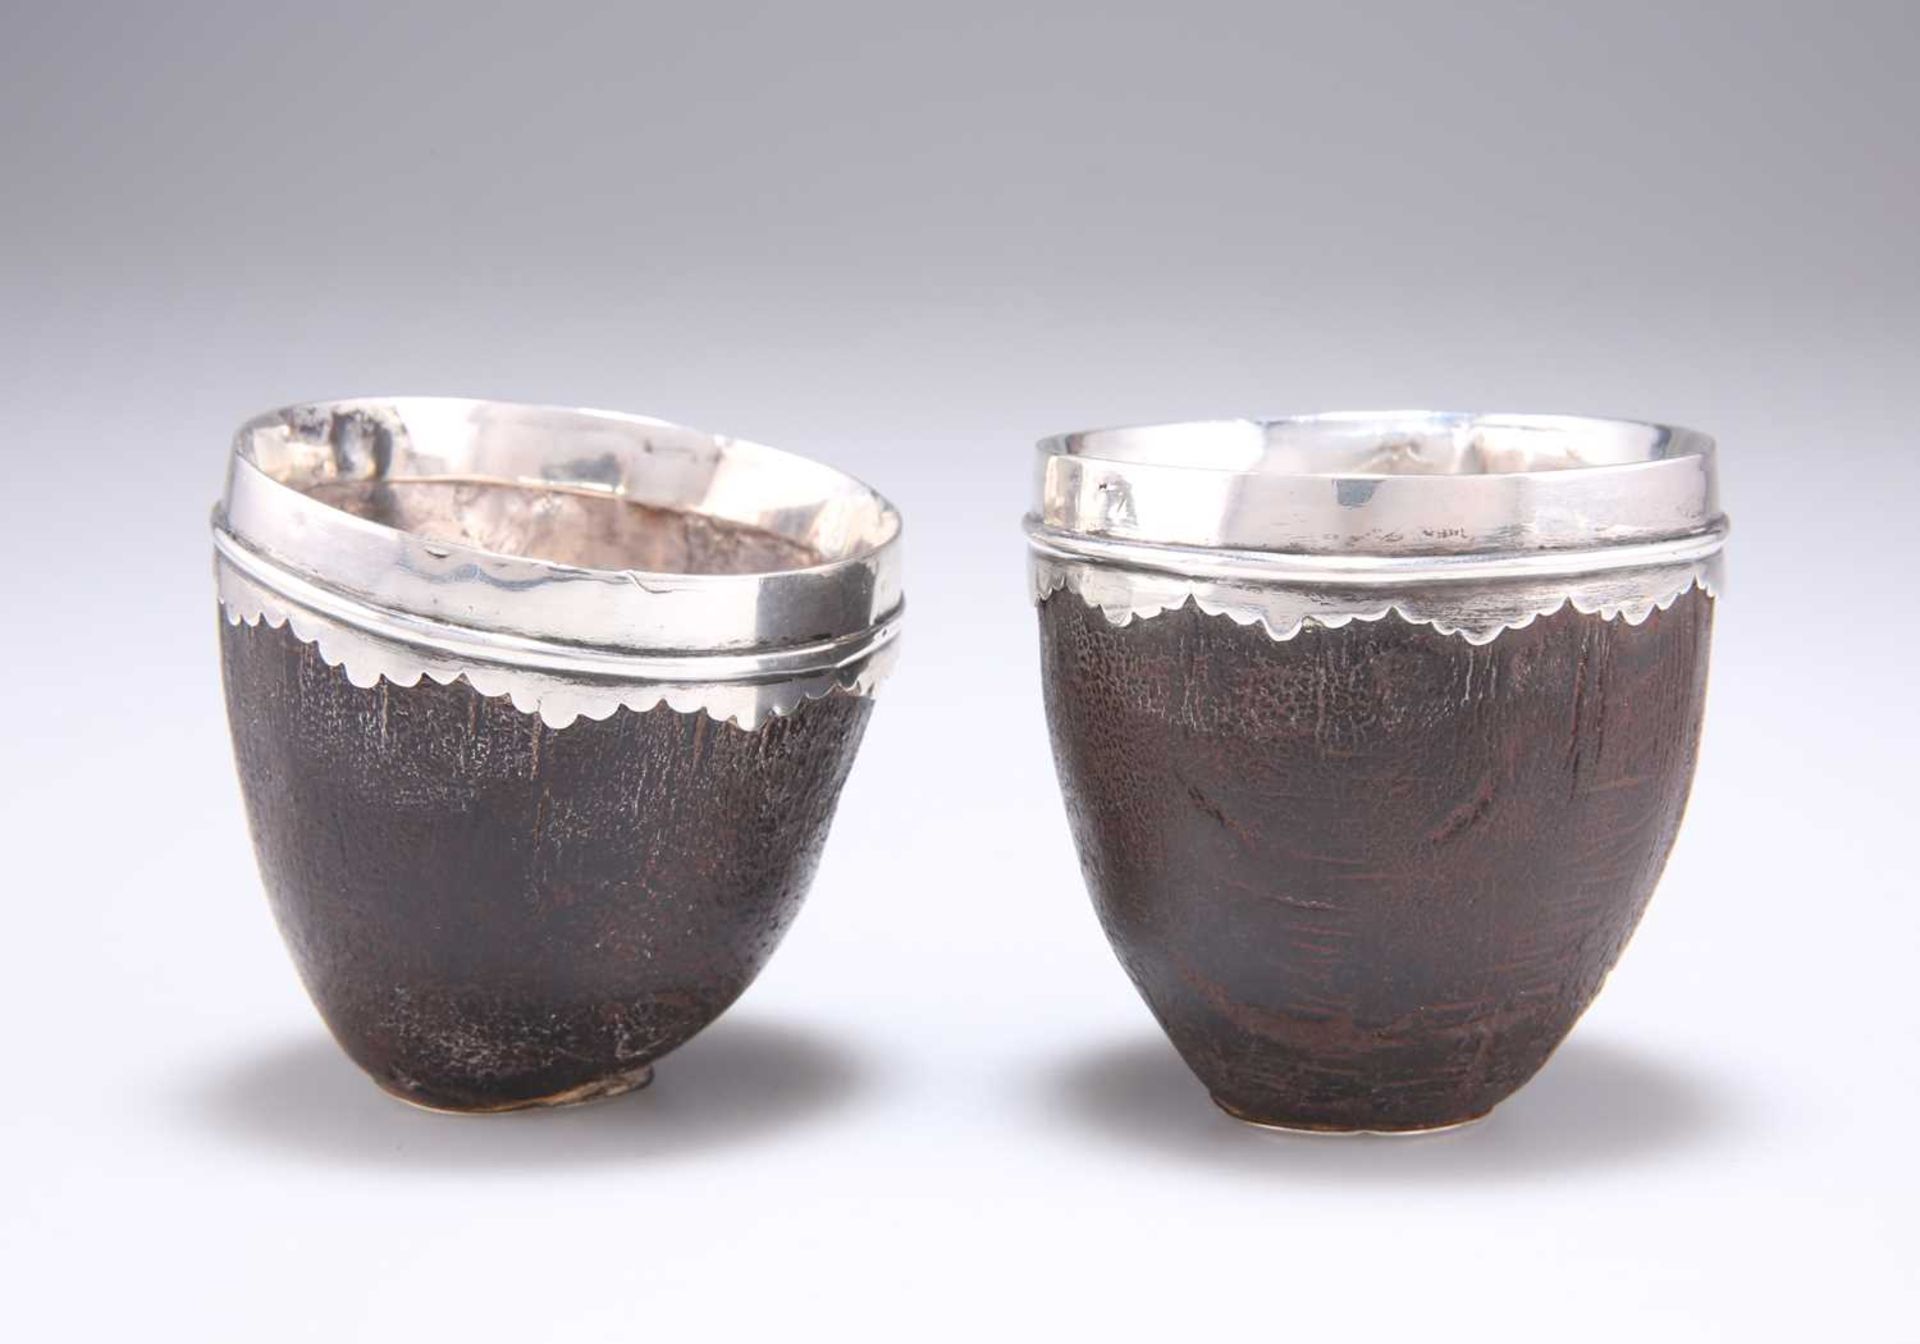 A PAIR OF LATE 18TH/EARLY 19TH CENTURY MOUNTED COCONUT CUPS - Image 2 of 4